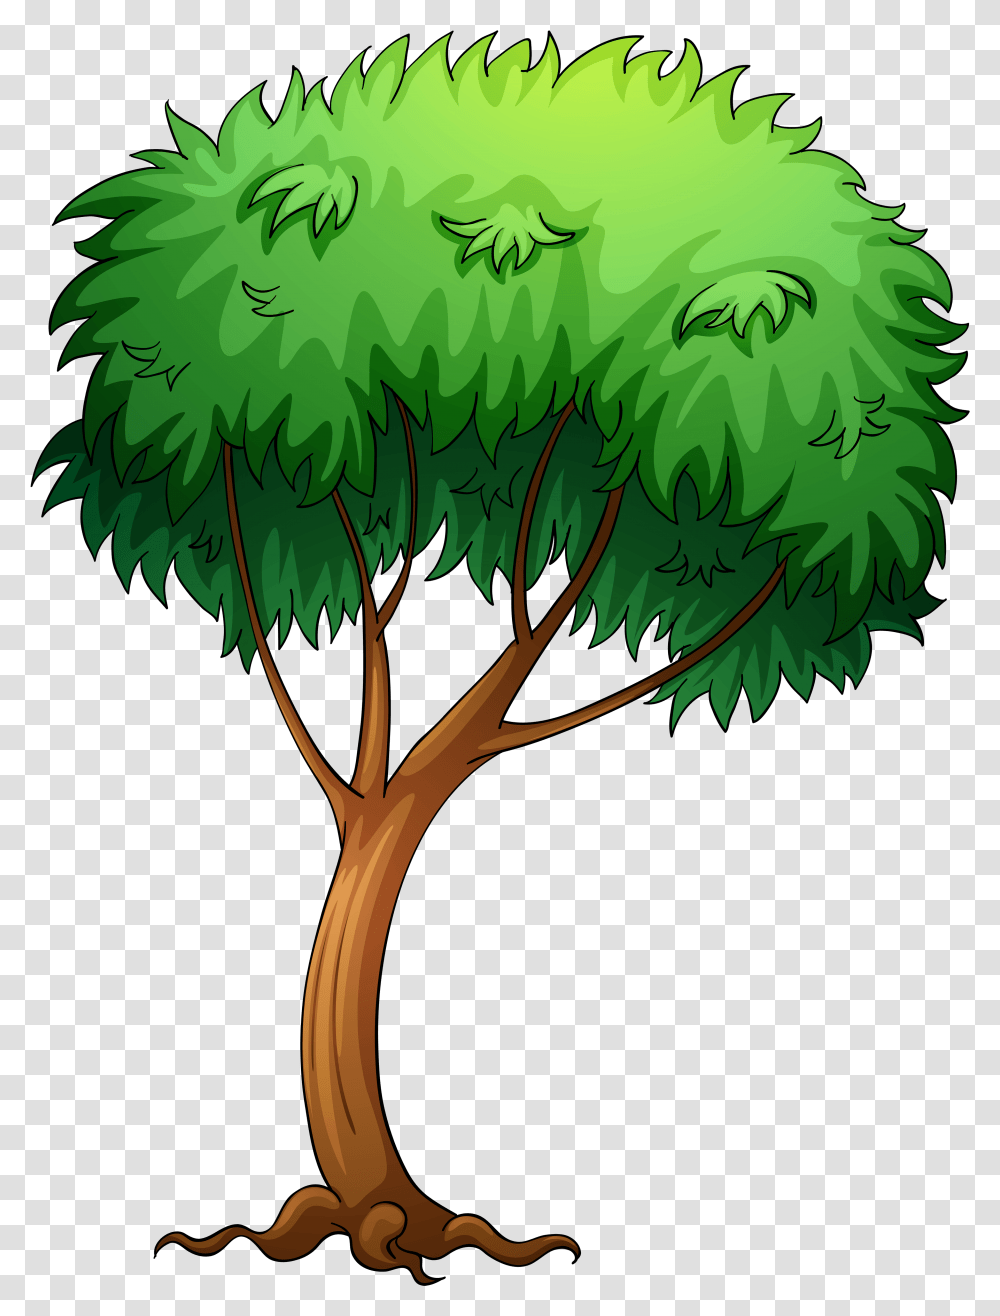 Pictures Of Trees Image Tree With A Bird, Plant, Ornament, Pattern, Fractal Transparent Png